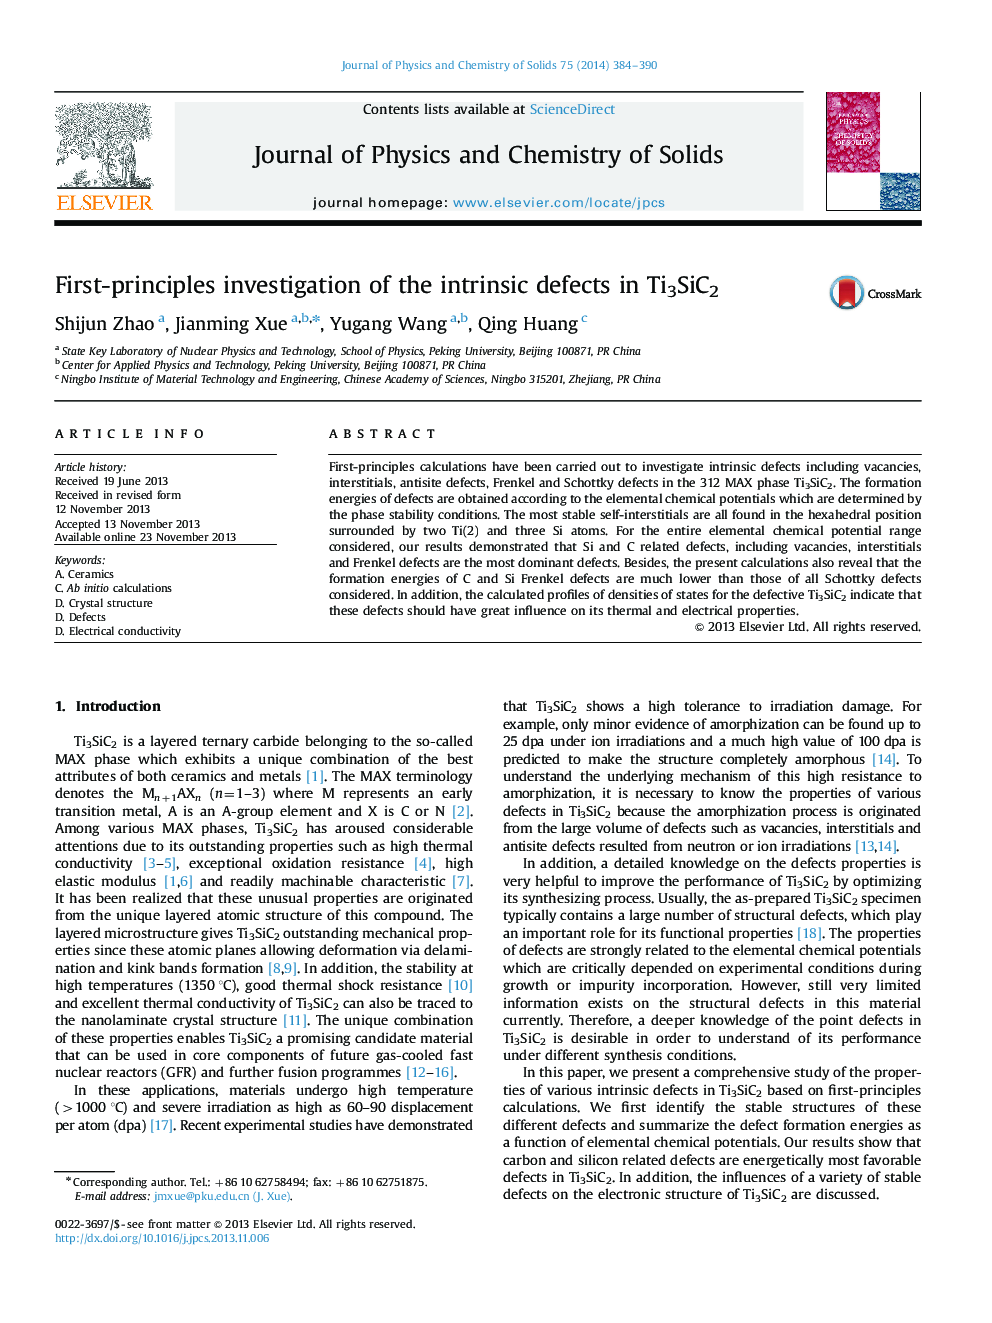 First-principles investigation of the intrinsic defects in Ti3SiC2